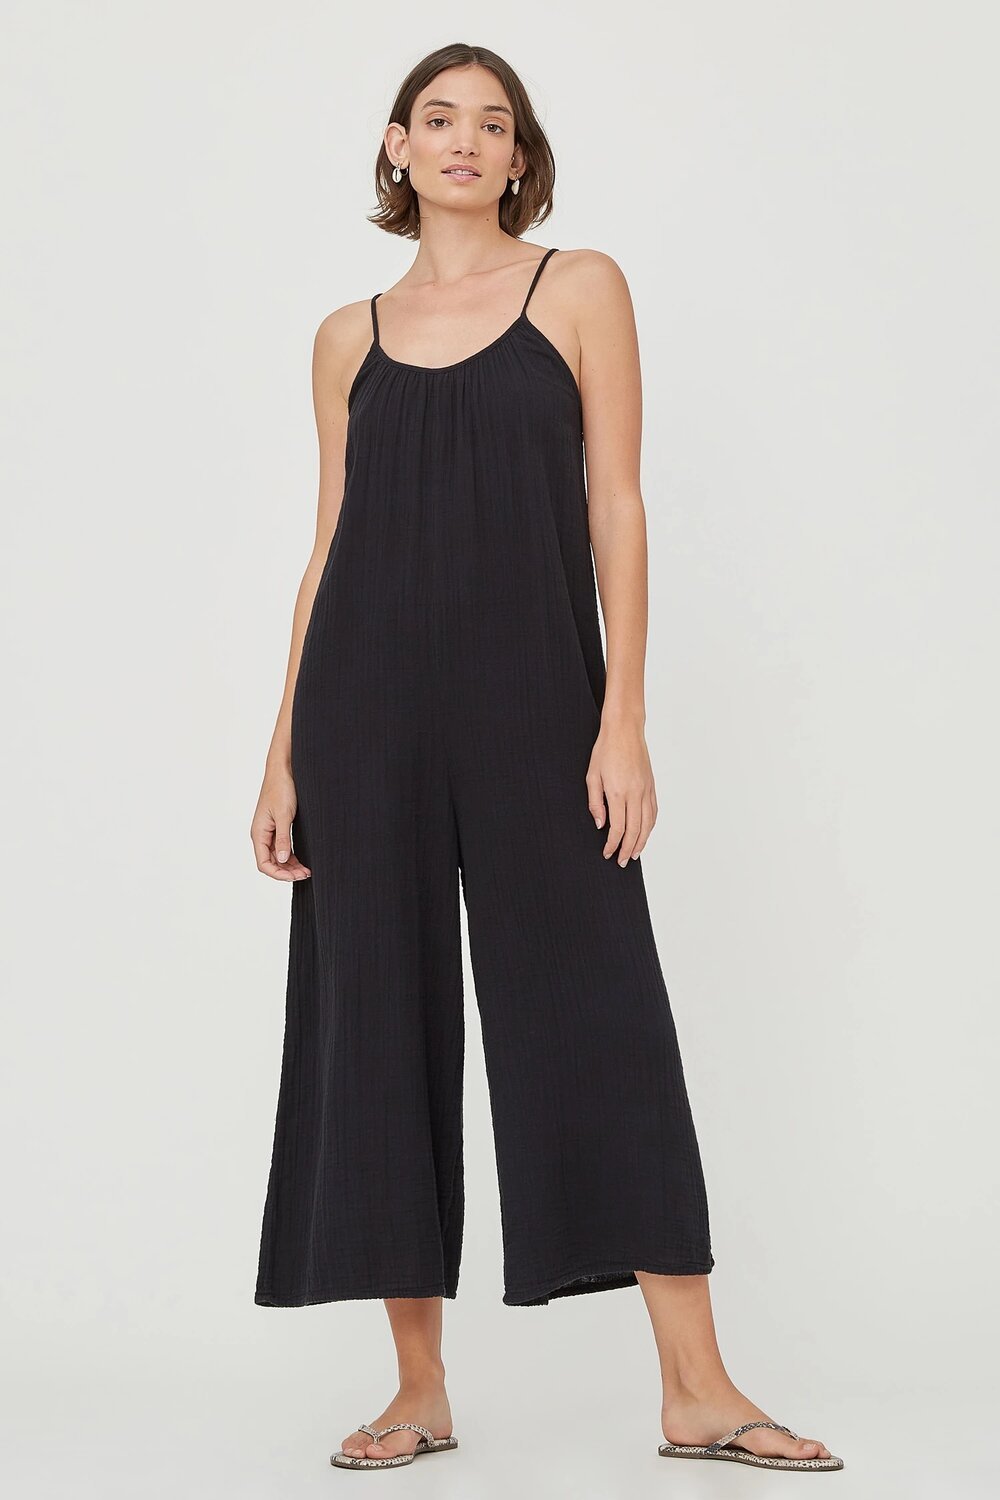 Woodstock Jumpsuit | Tar | Lacausacategory_Womens Clothing from Lacausa - SHOPELEOS